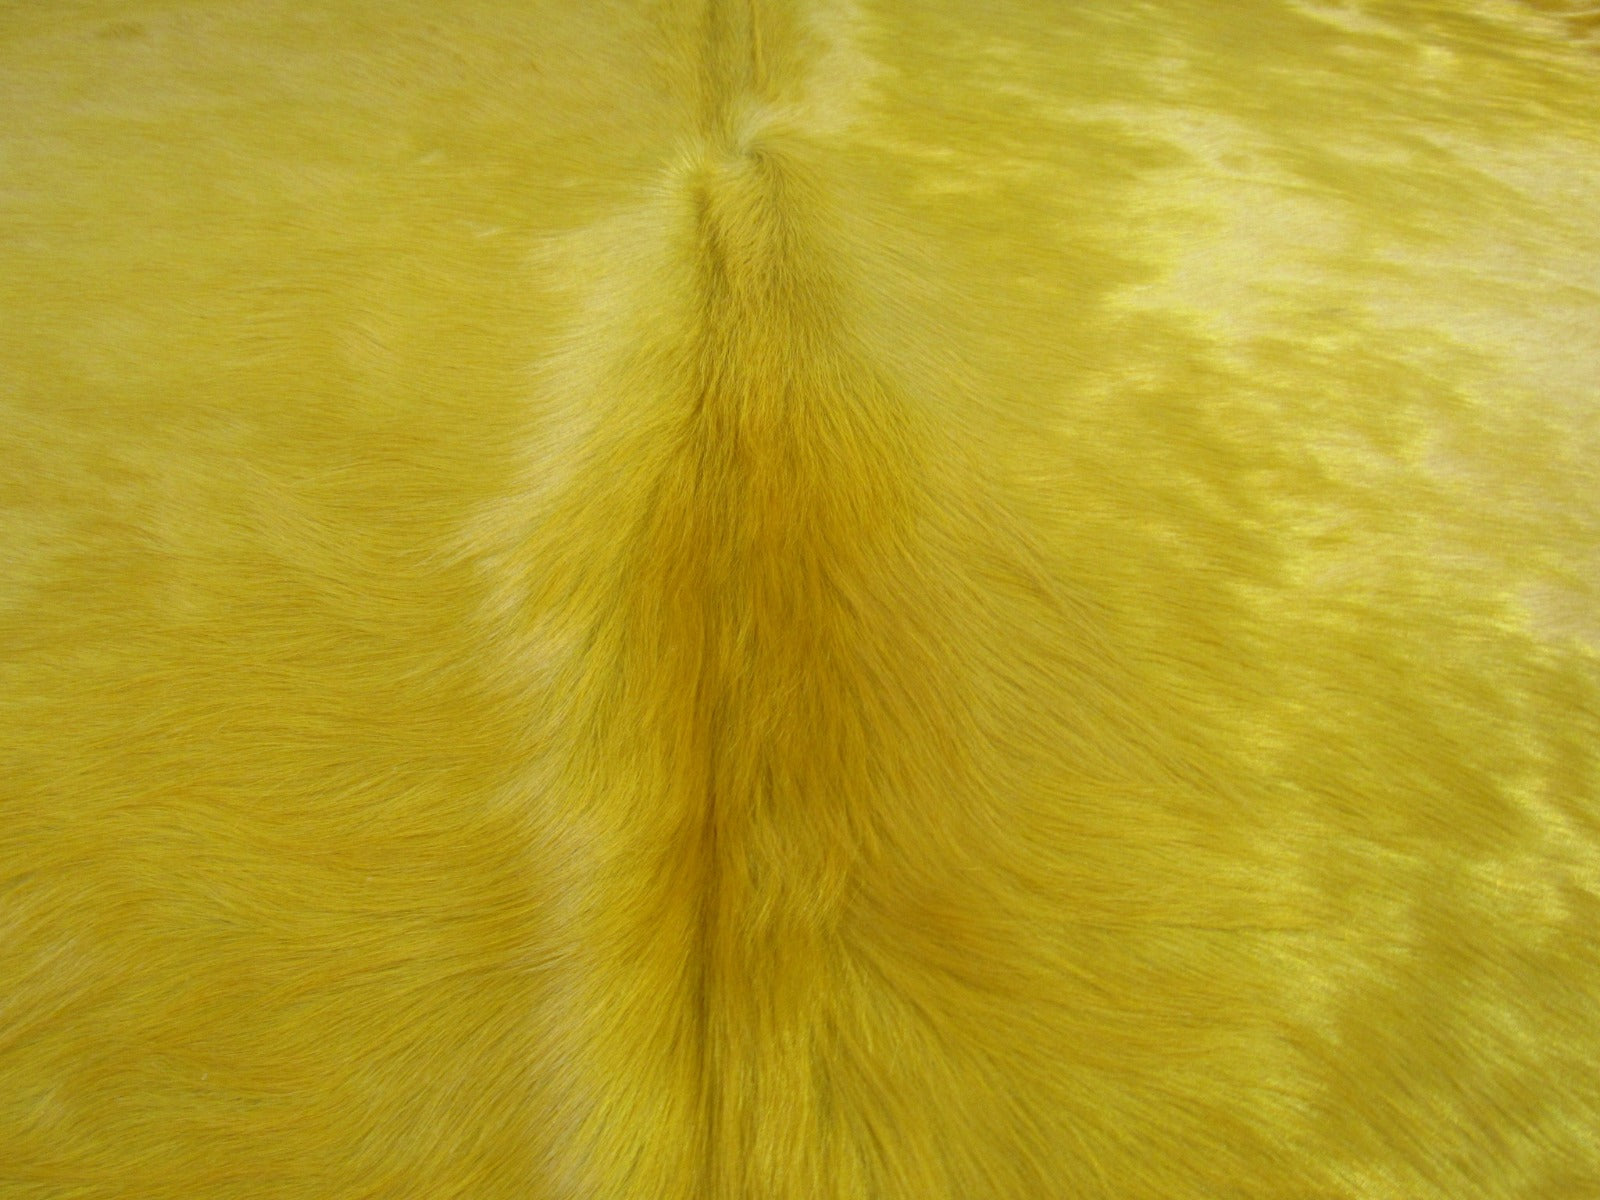 Gorgeous Long Haired Dyed Yellow Cowhide Rug Size: 7.2x8 feet C-1774